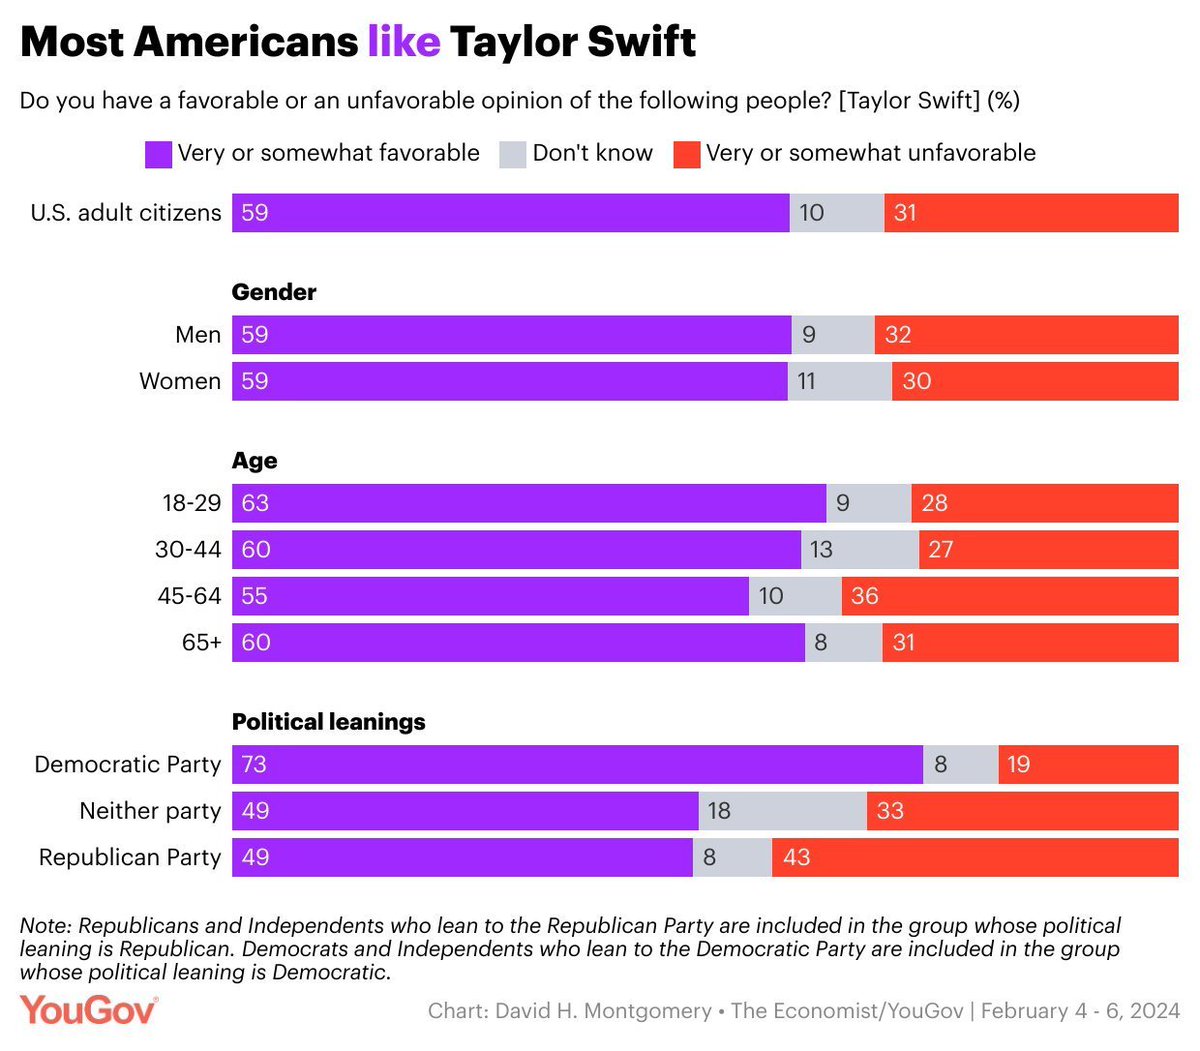 Most Americans (59%) have a favorable opinion of Taylor Swift. 31% have an unfavorable view of her. today.yougov.com/sports/article…